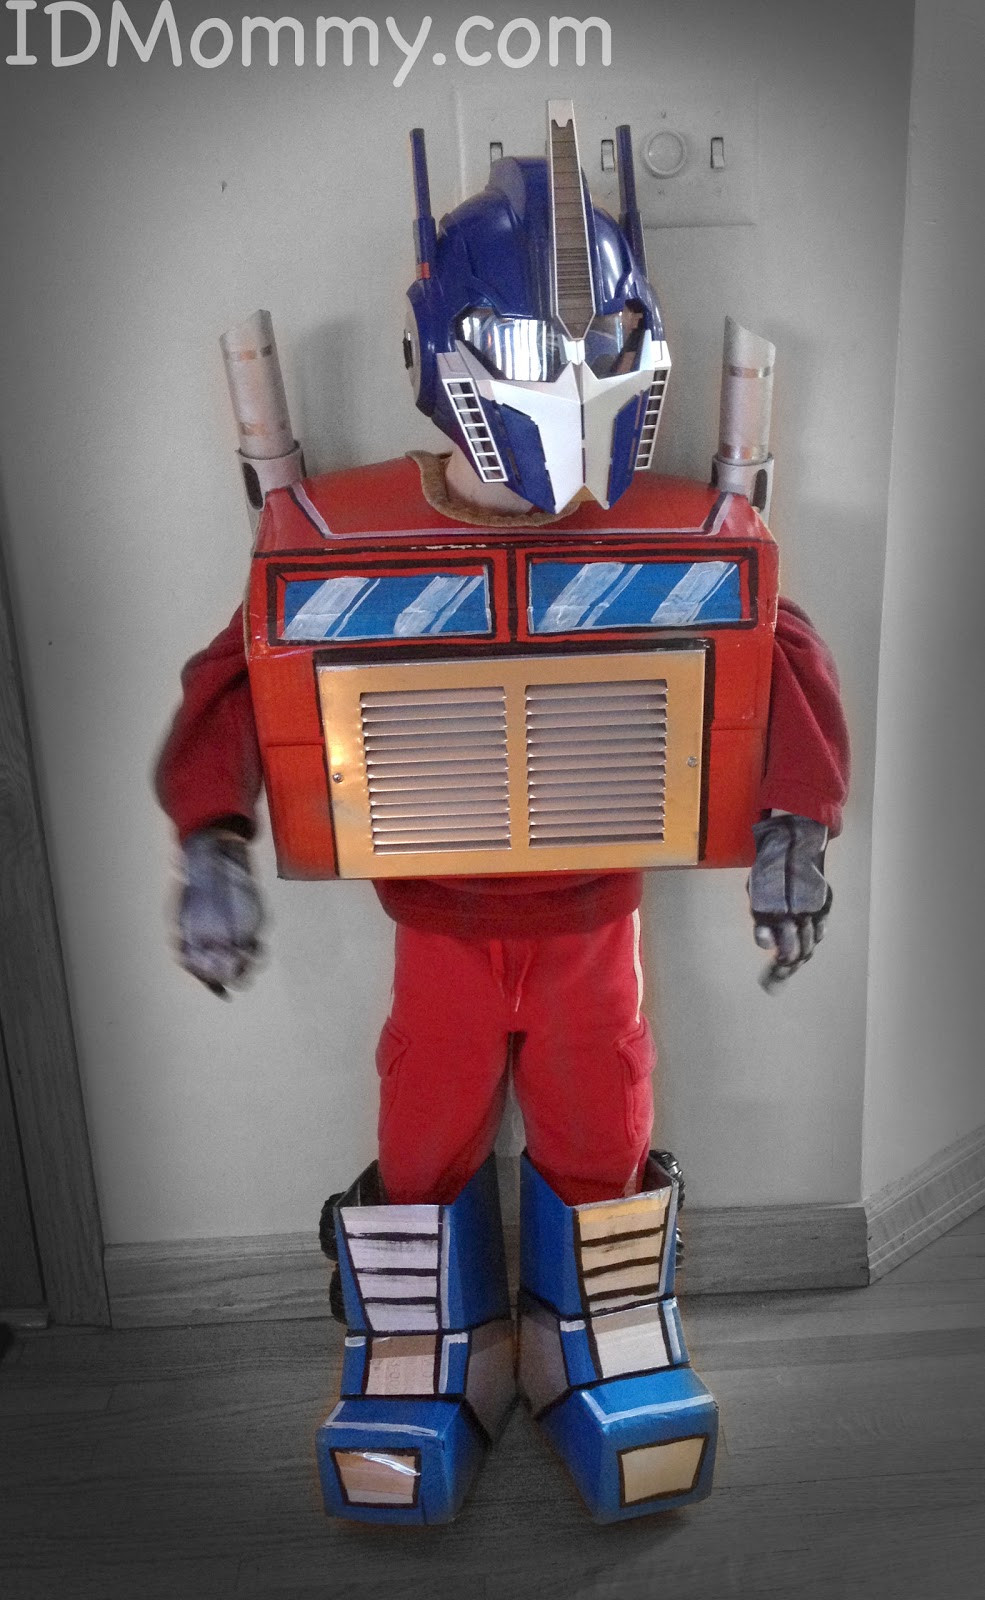 DIY Transformers Costumes
 ID Mommy DIY Mickey Mouse and Optimus Prime Transformer